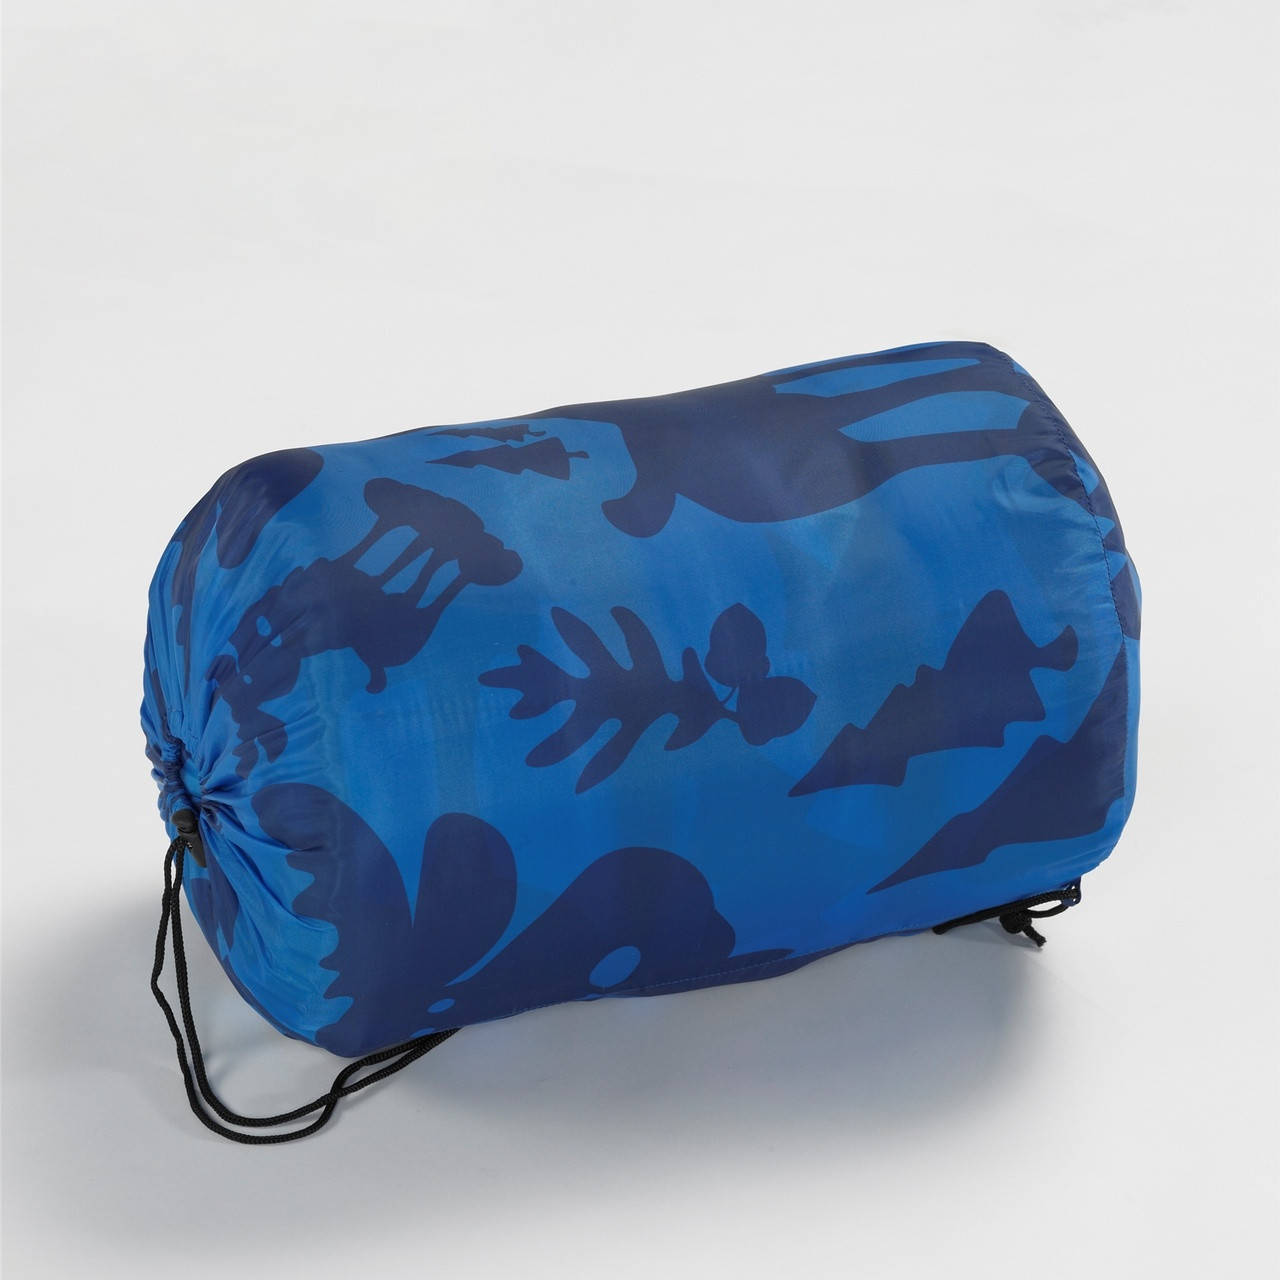 Wenzel Kids Blue Moose 40 degree sleeping bag rolled and stored in the blue storage bag